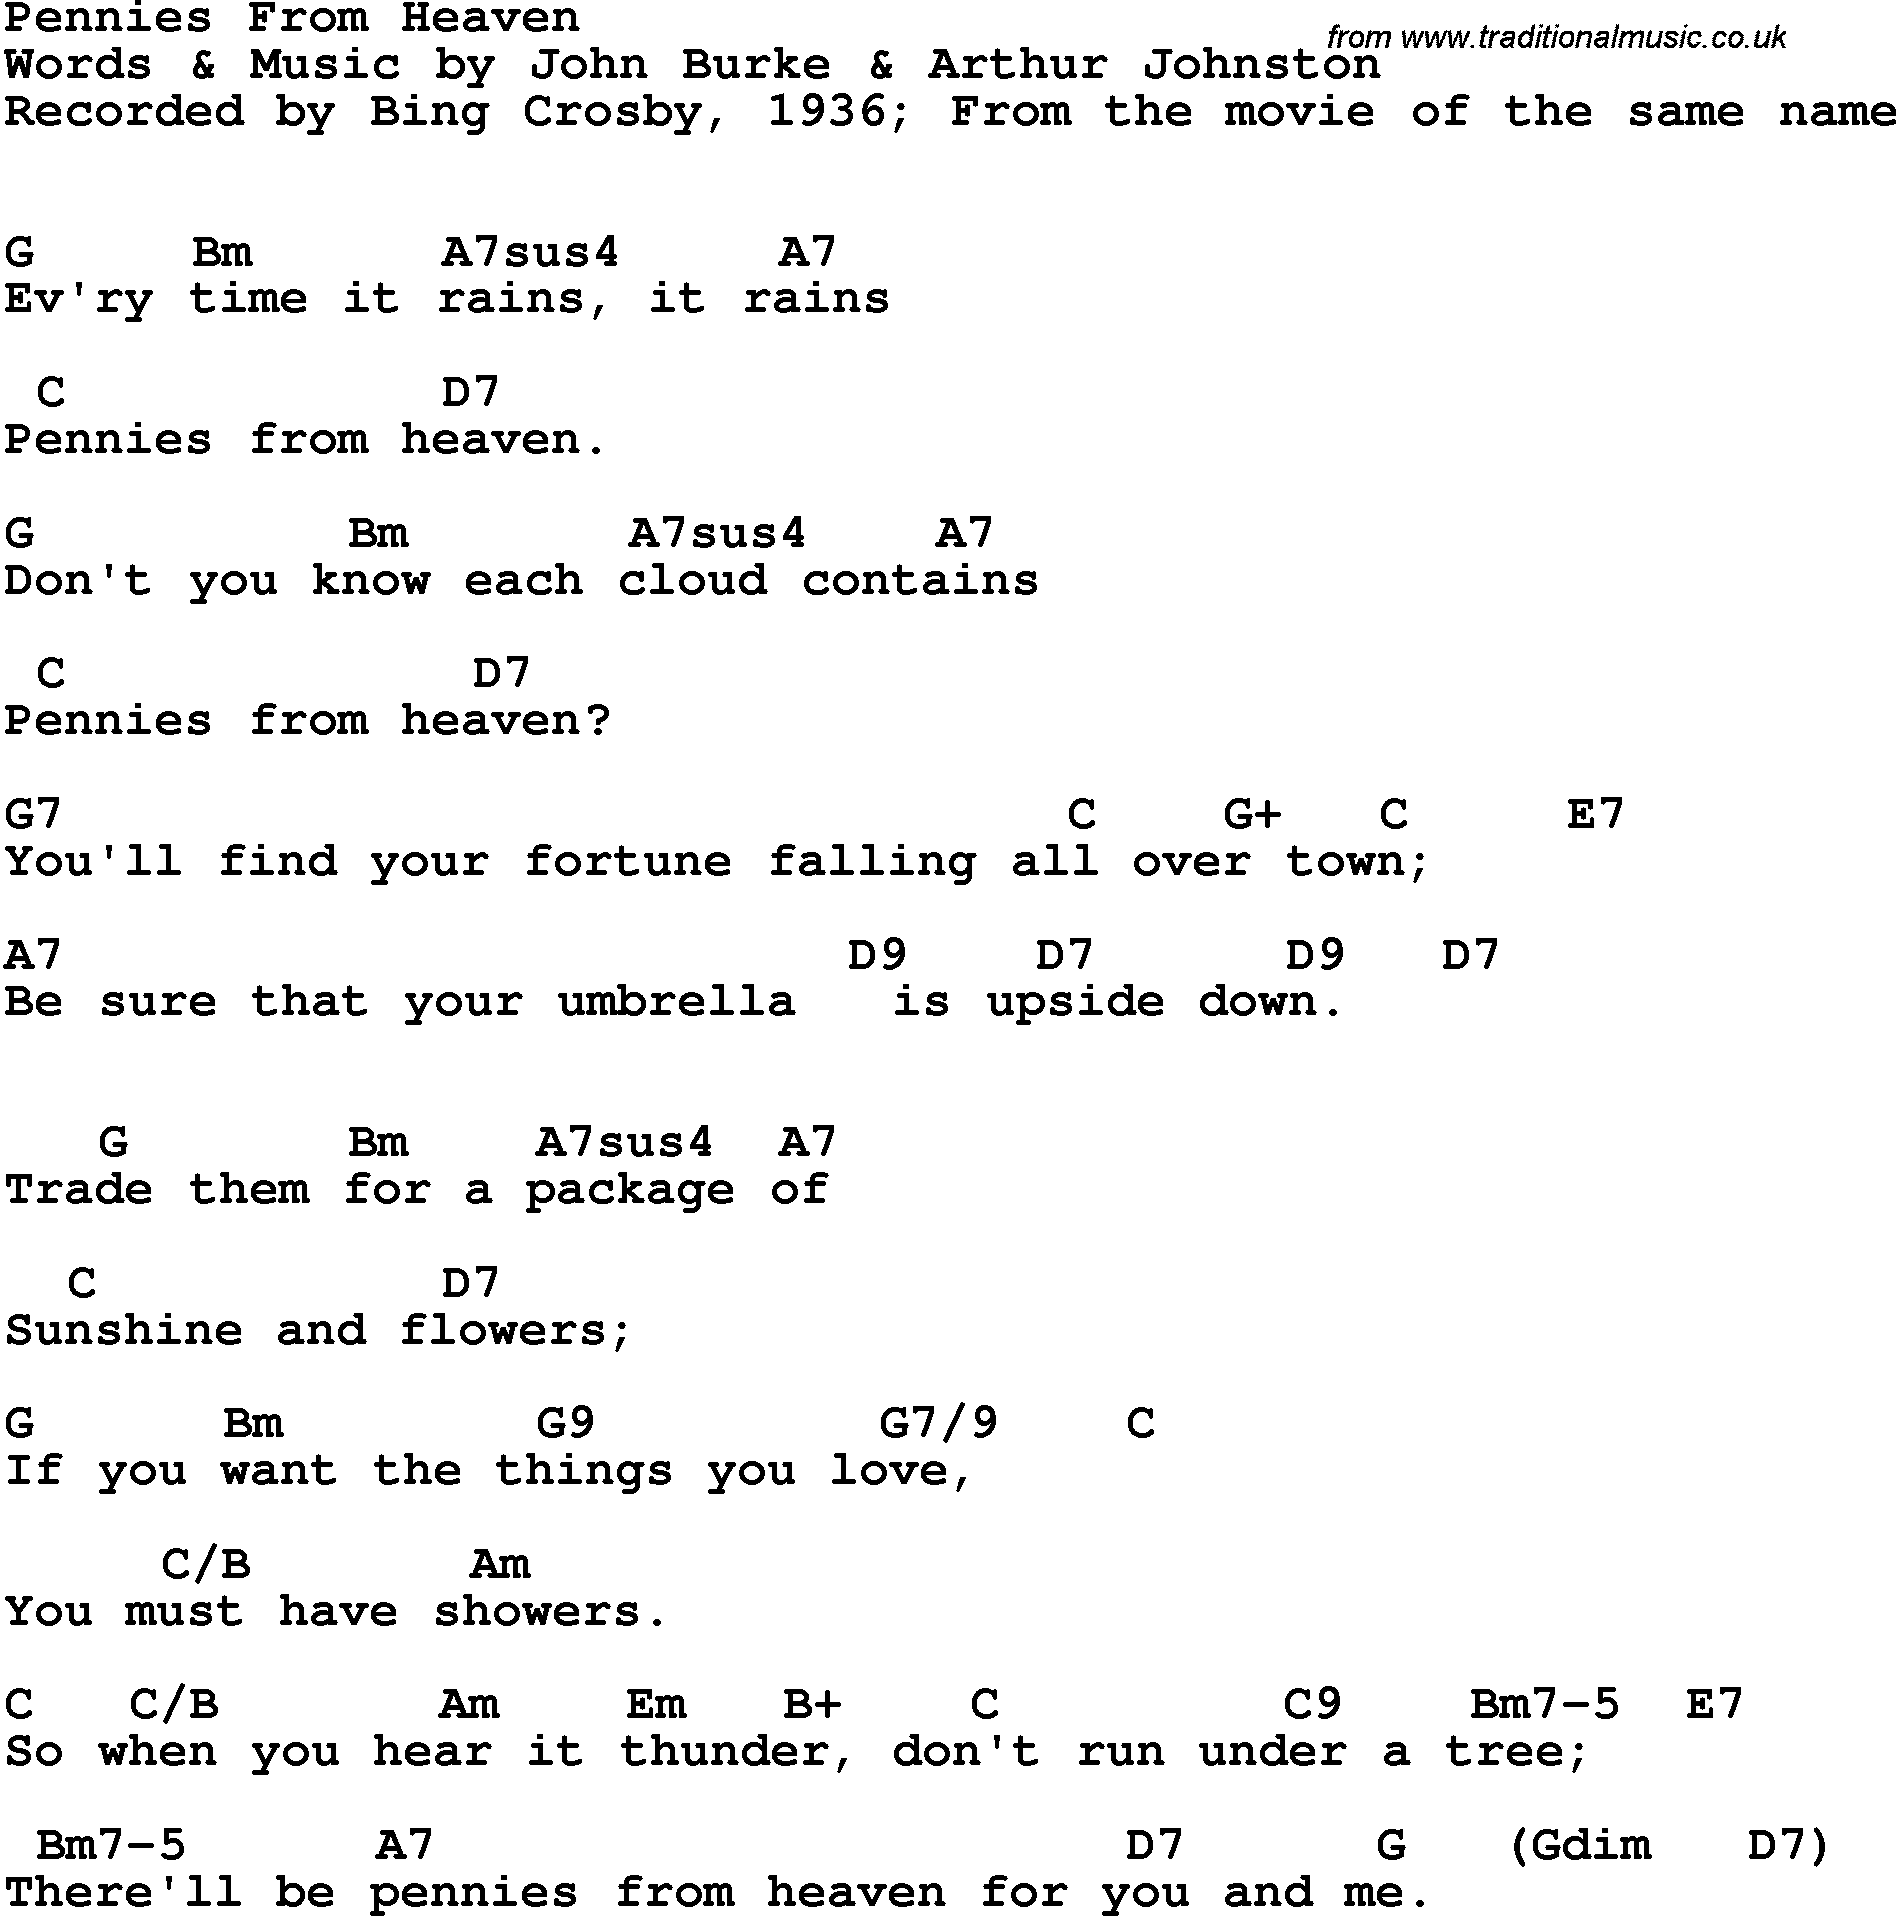 Song Lyrics with guitar chords for Pennies From Heaven - Bing Crosby, 1936